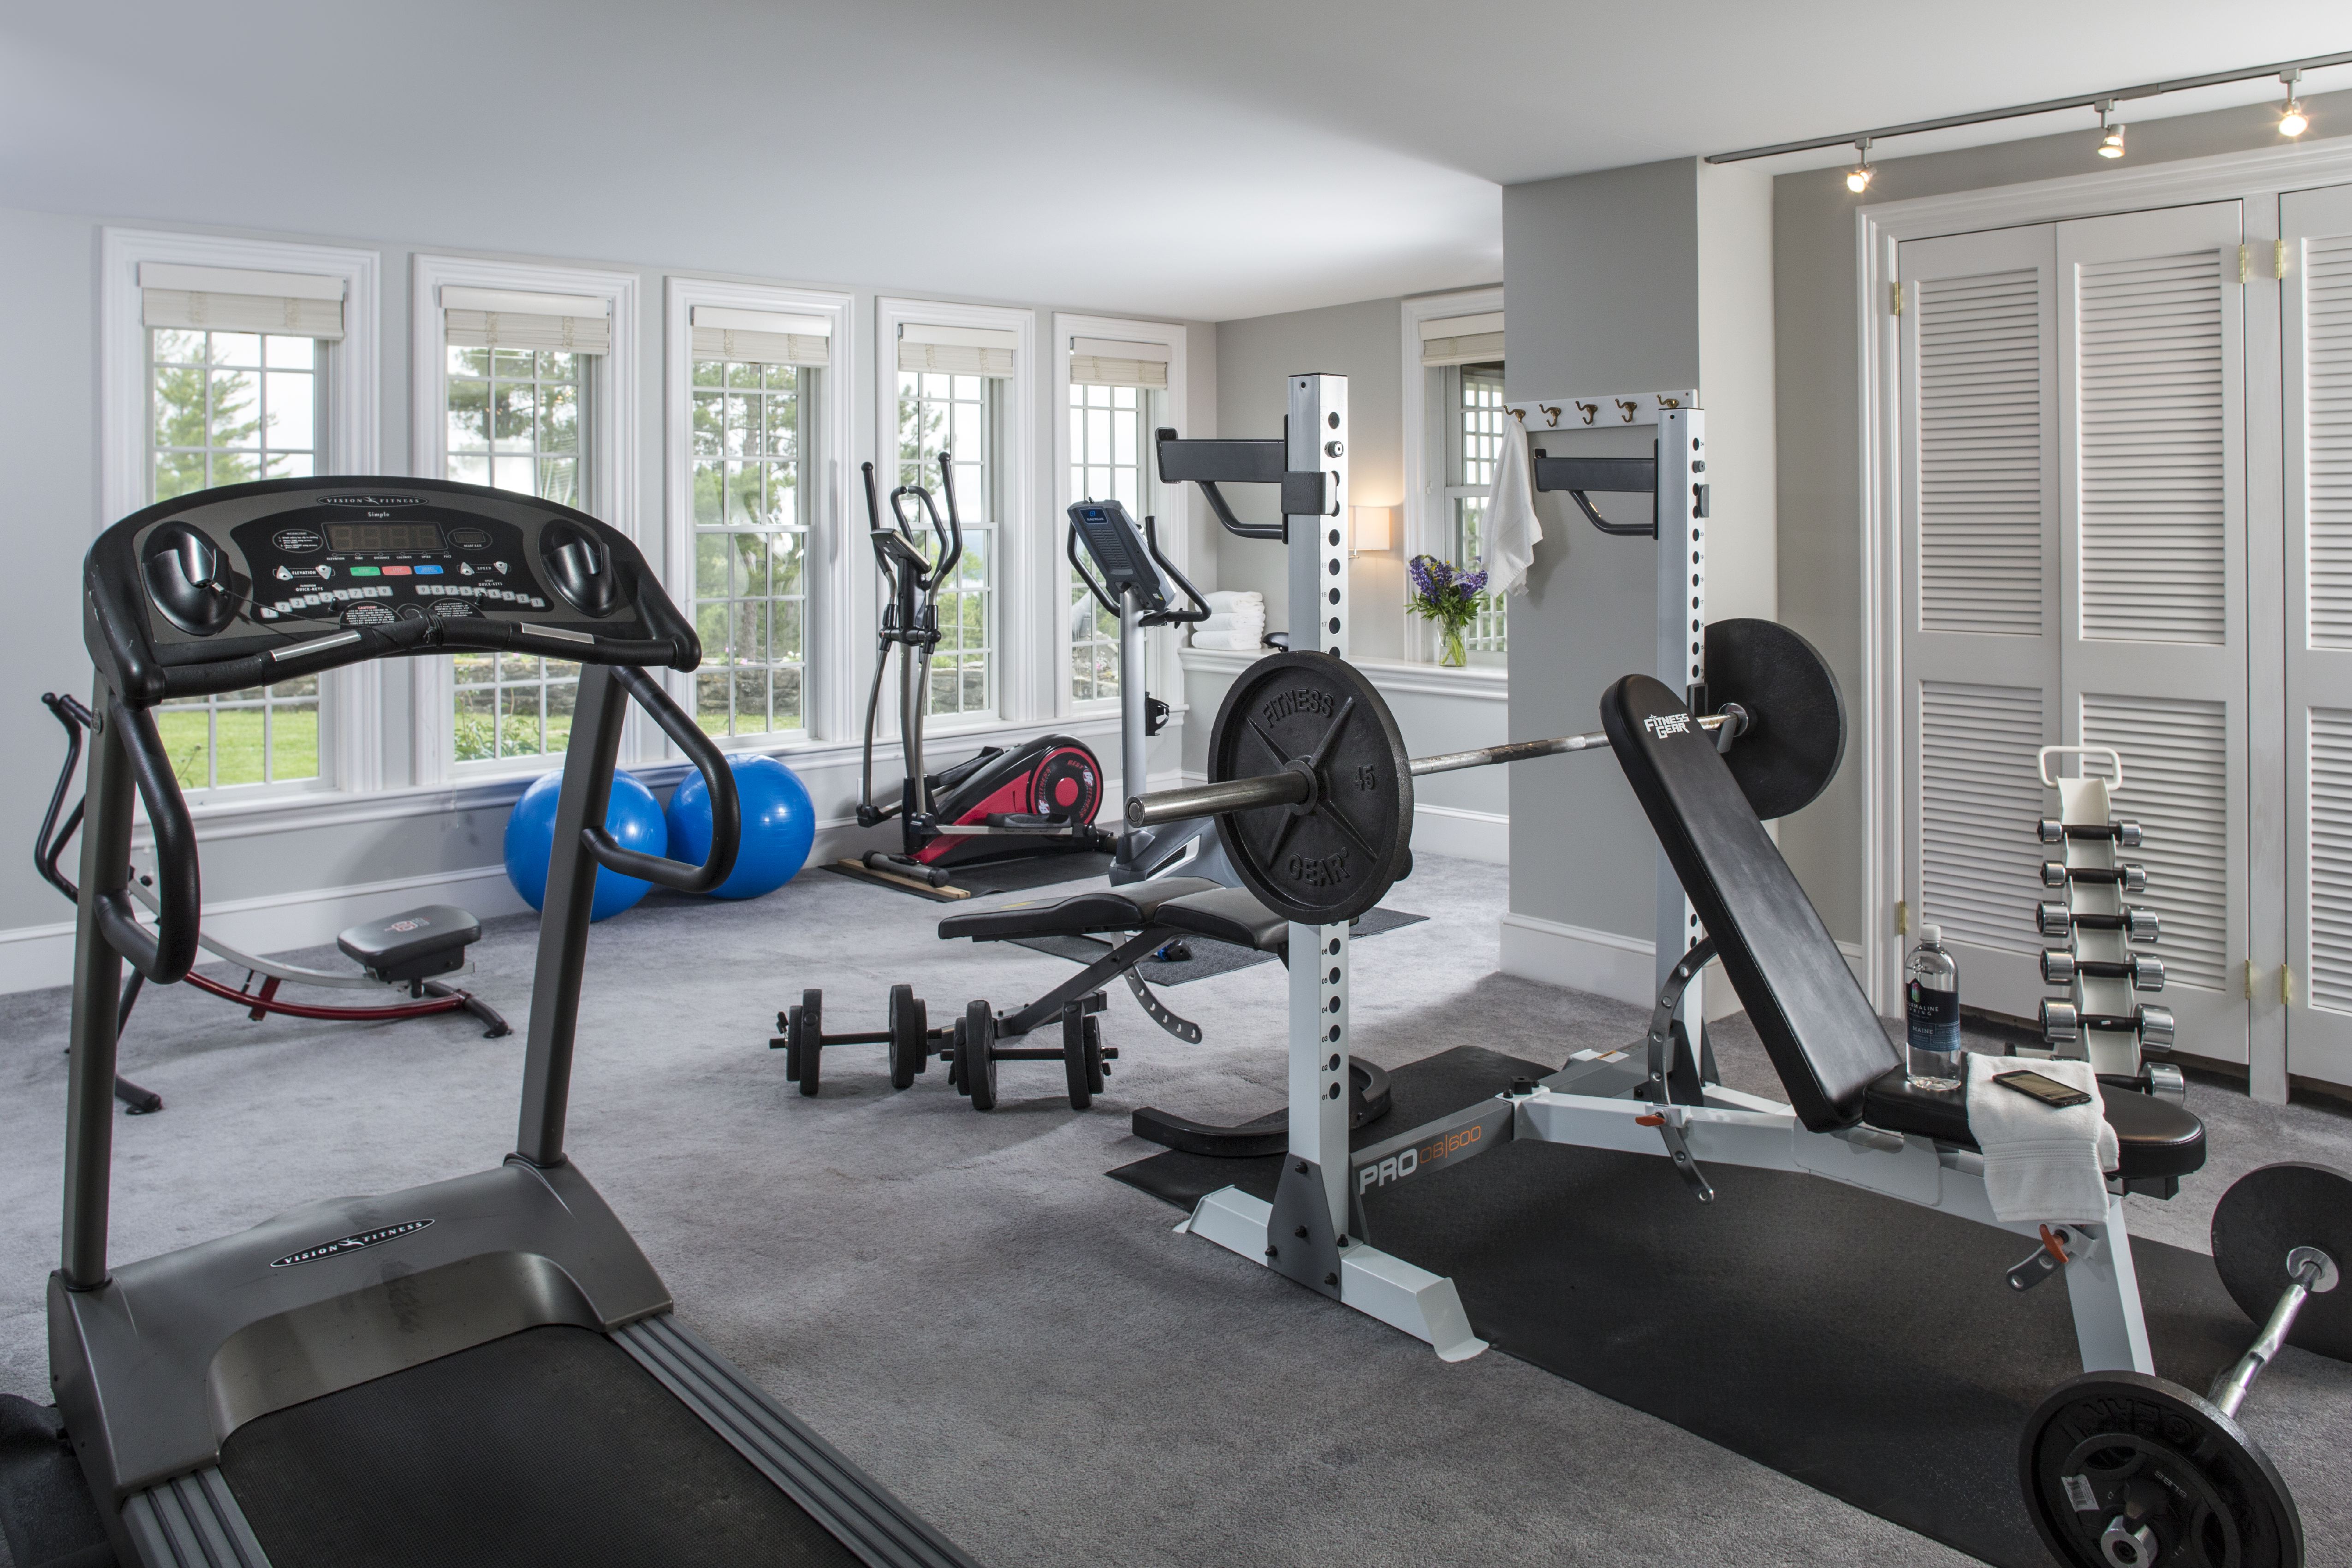 Best home gym equipment deals: Save on 